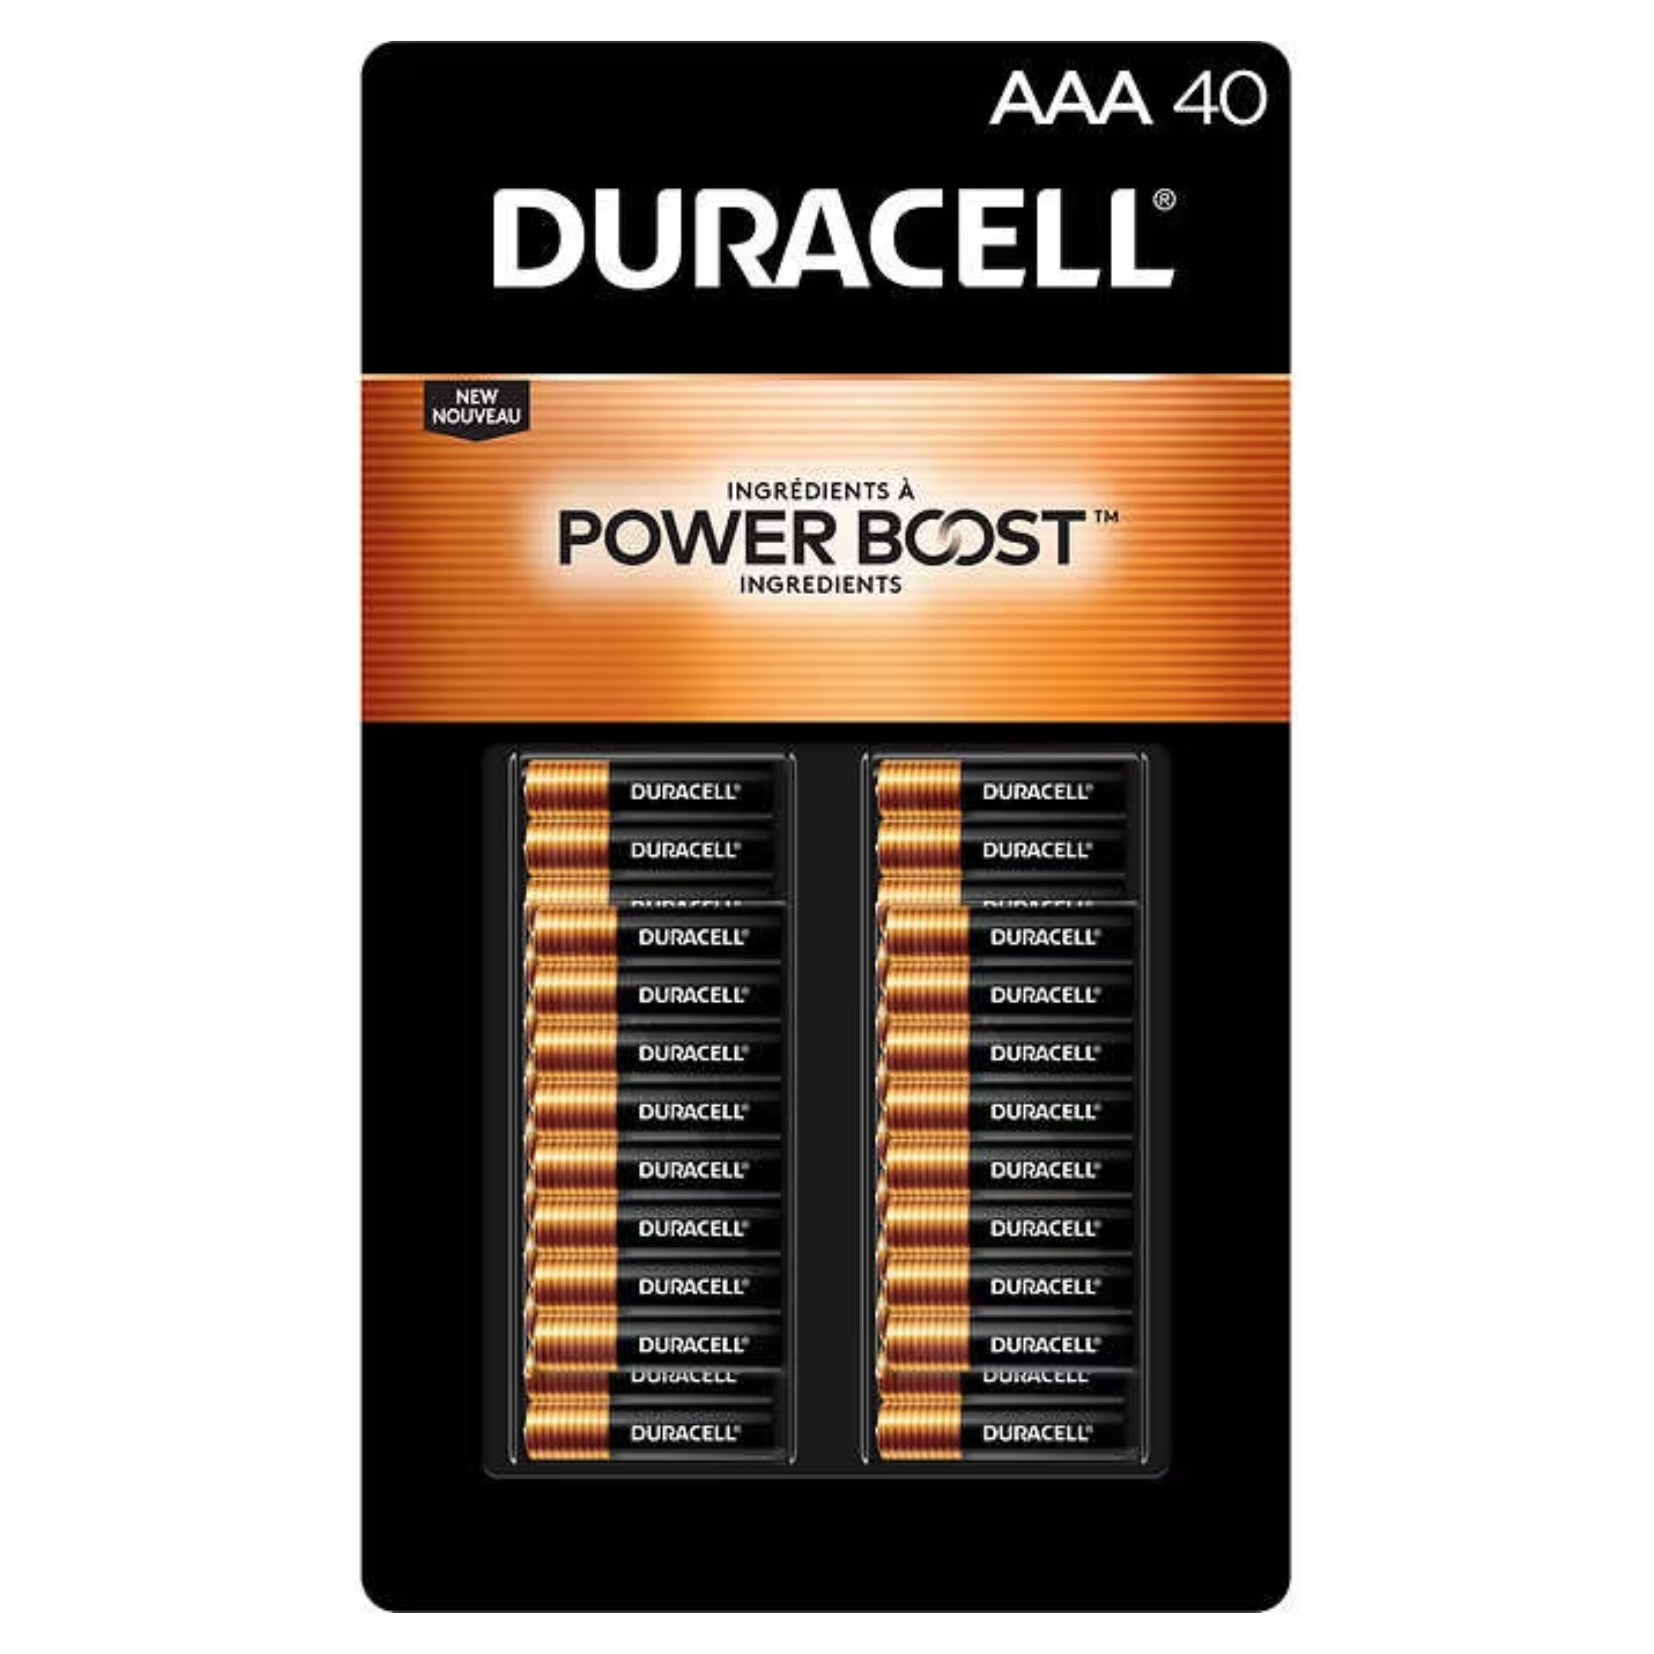 Duracell AAA Batteries 40ct